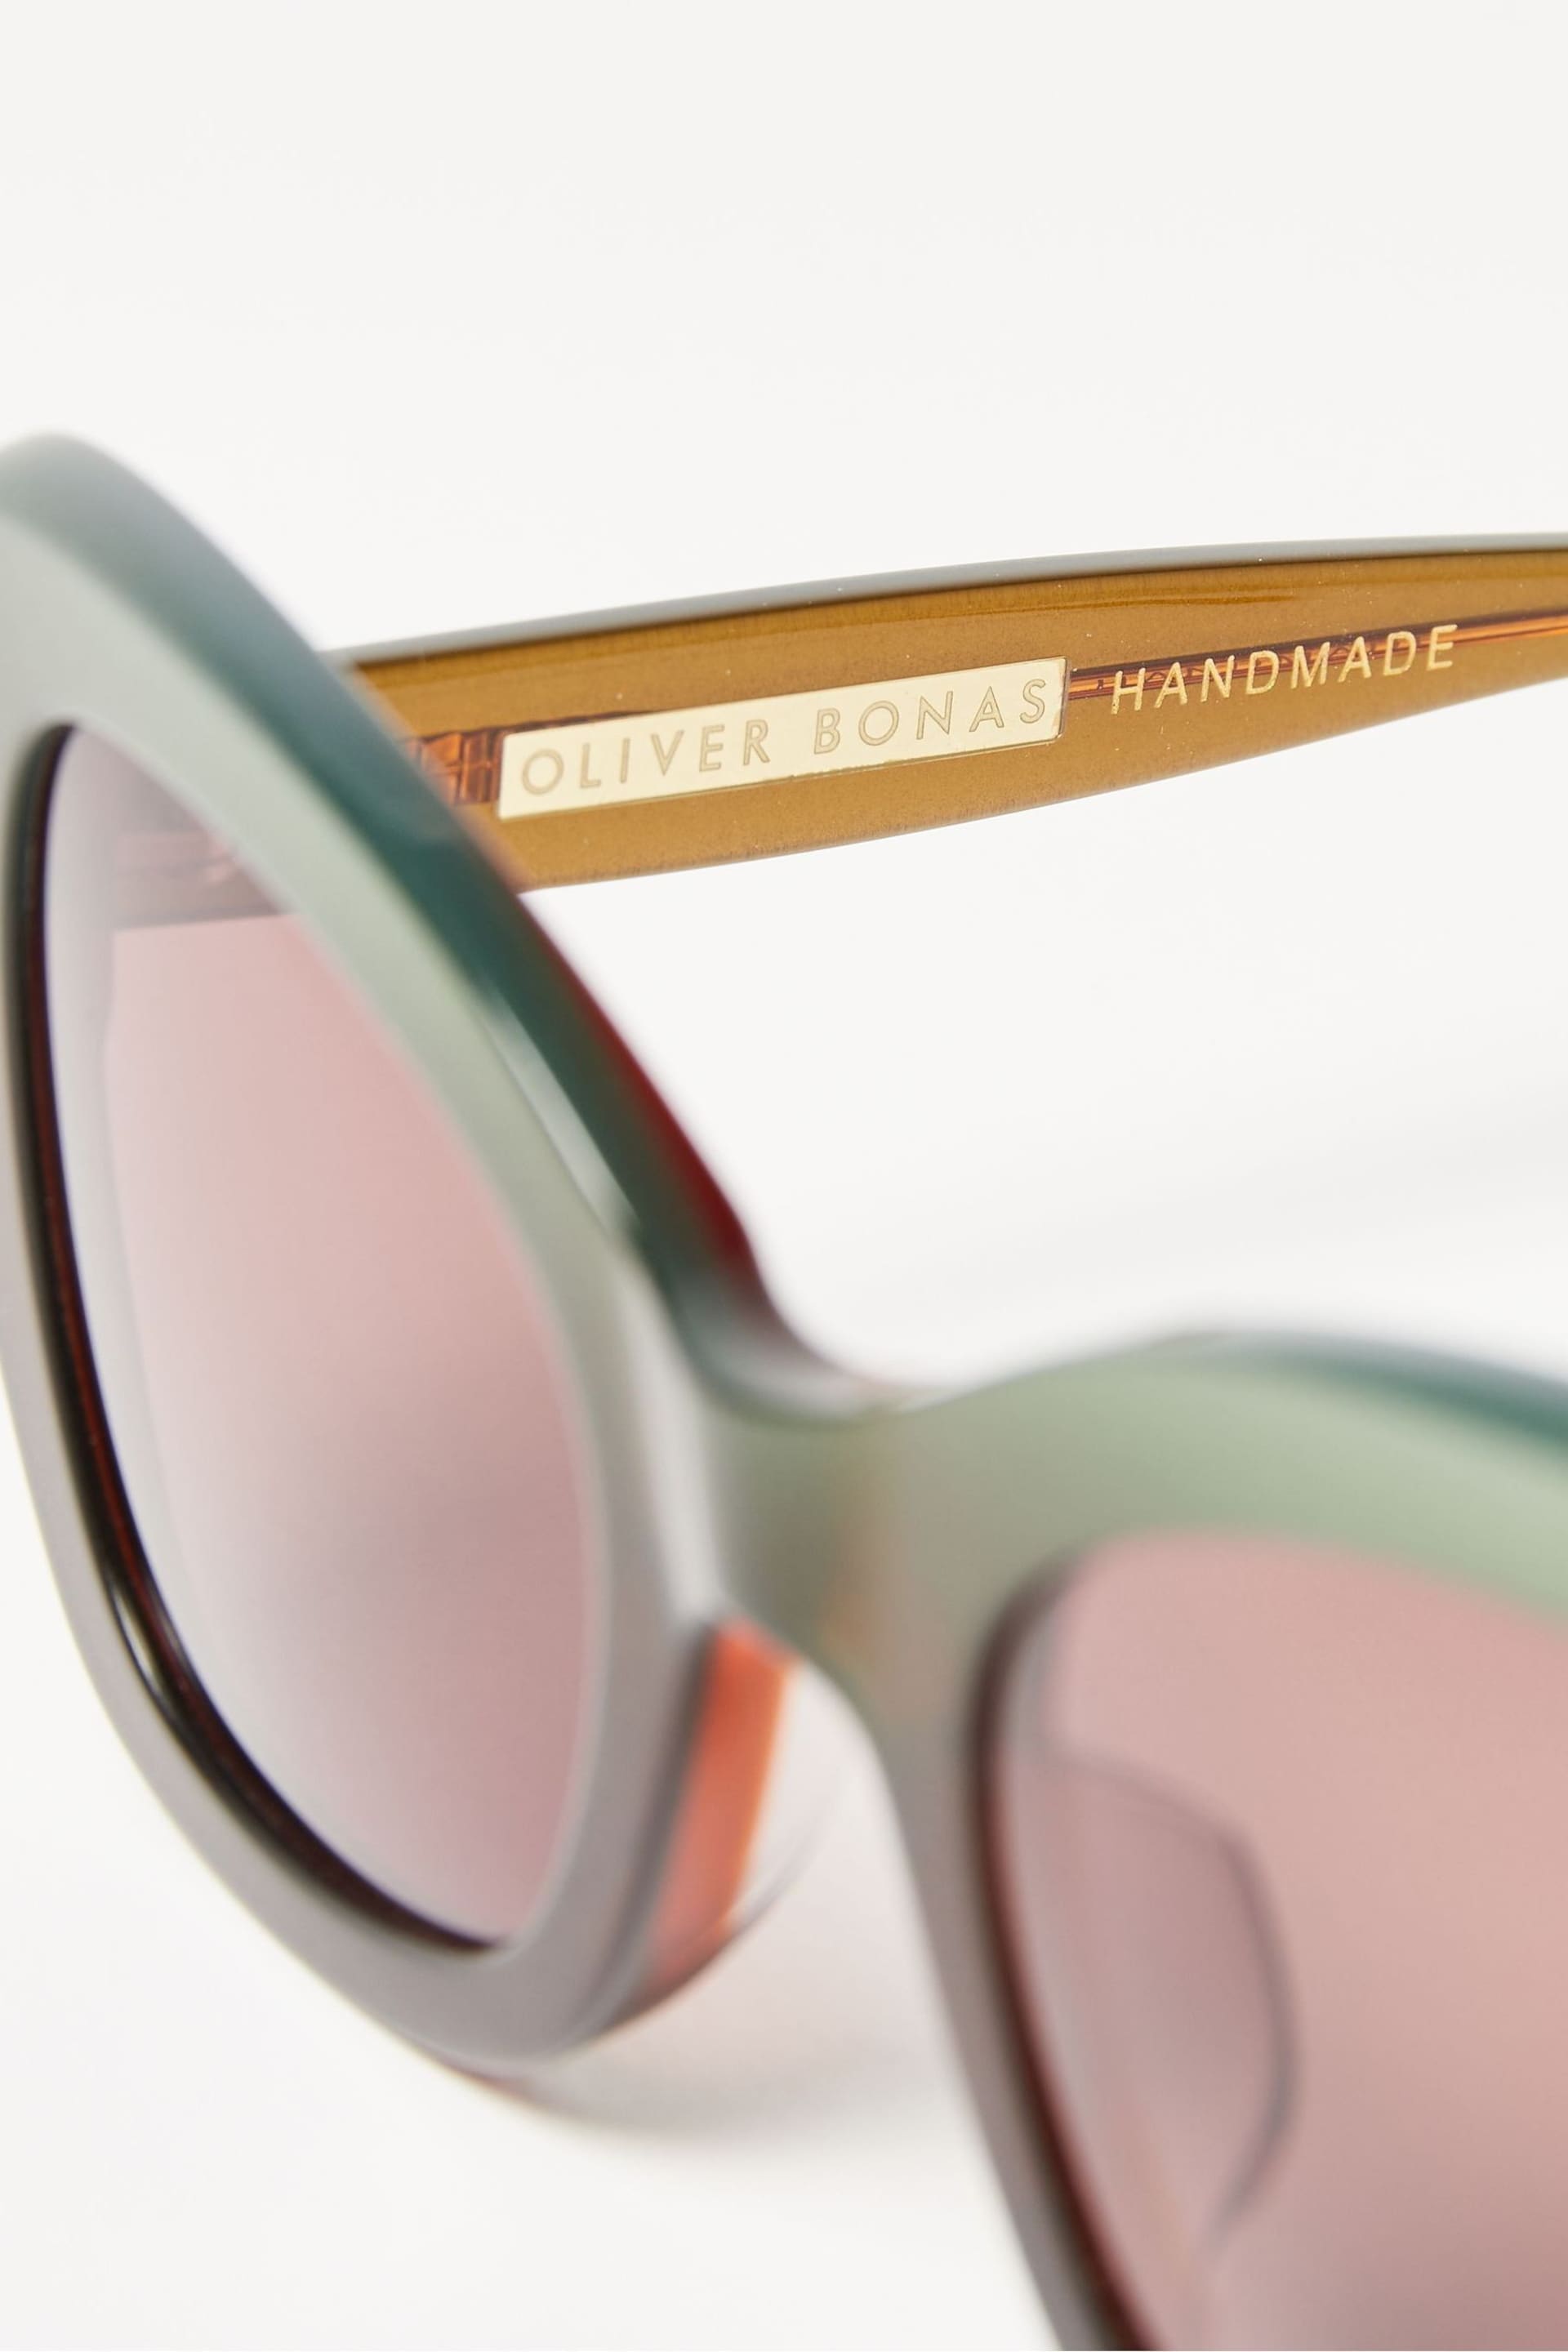 Oliver Bonas Green Ombre Shimmer Butterfly Acetate Sunglasses - Image 5 of 7